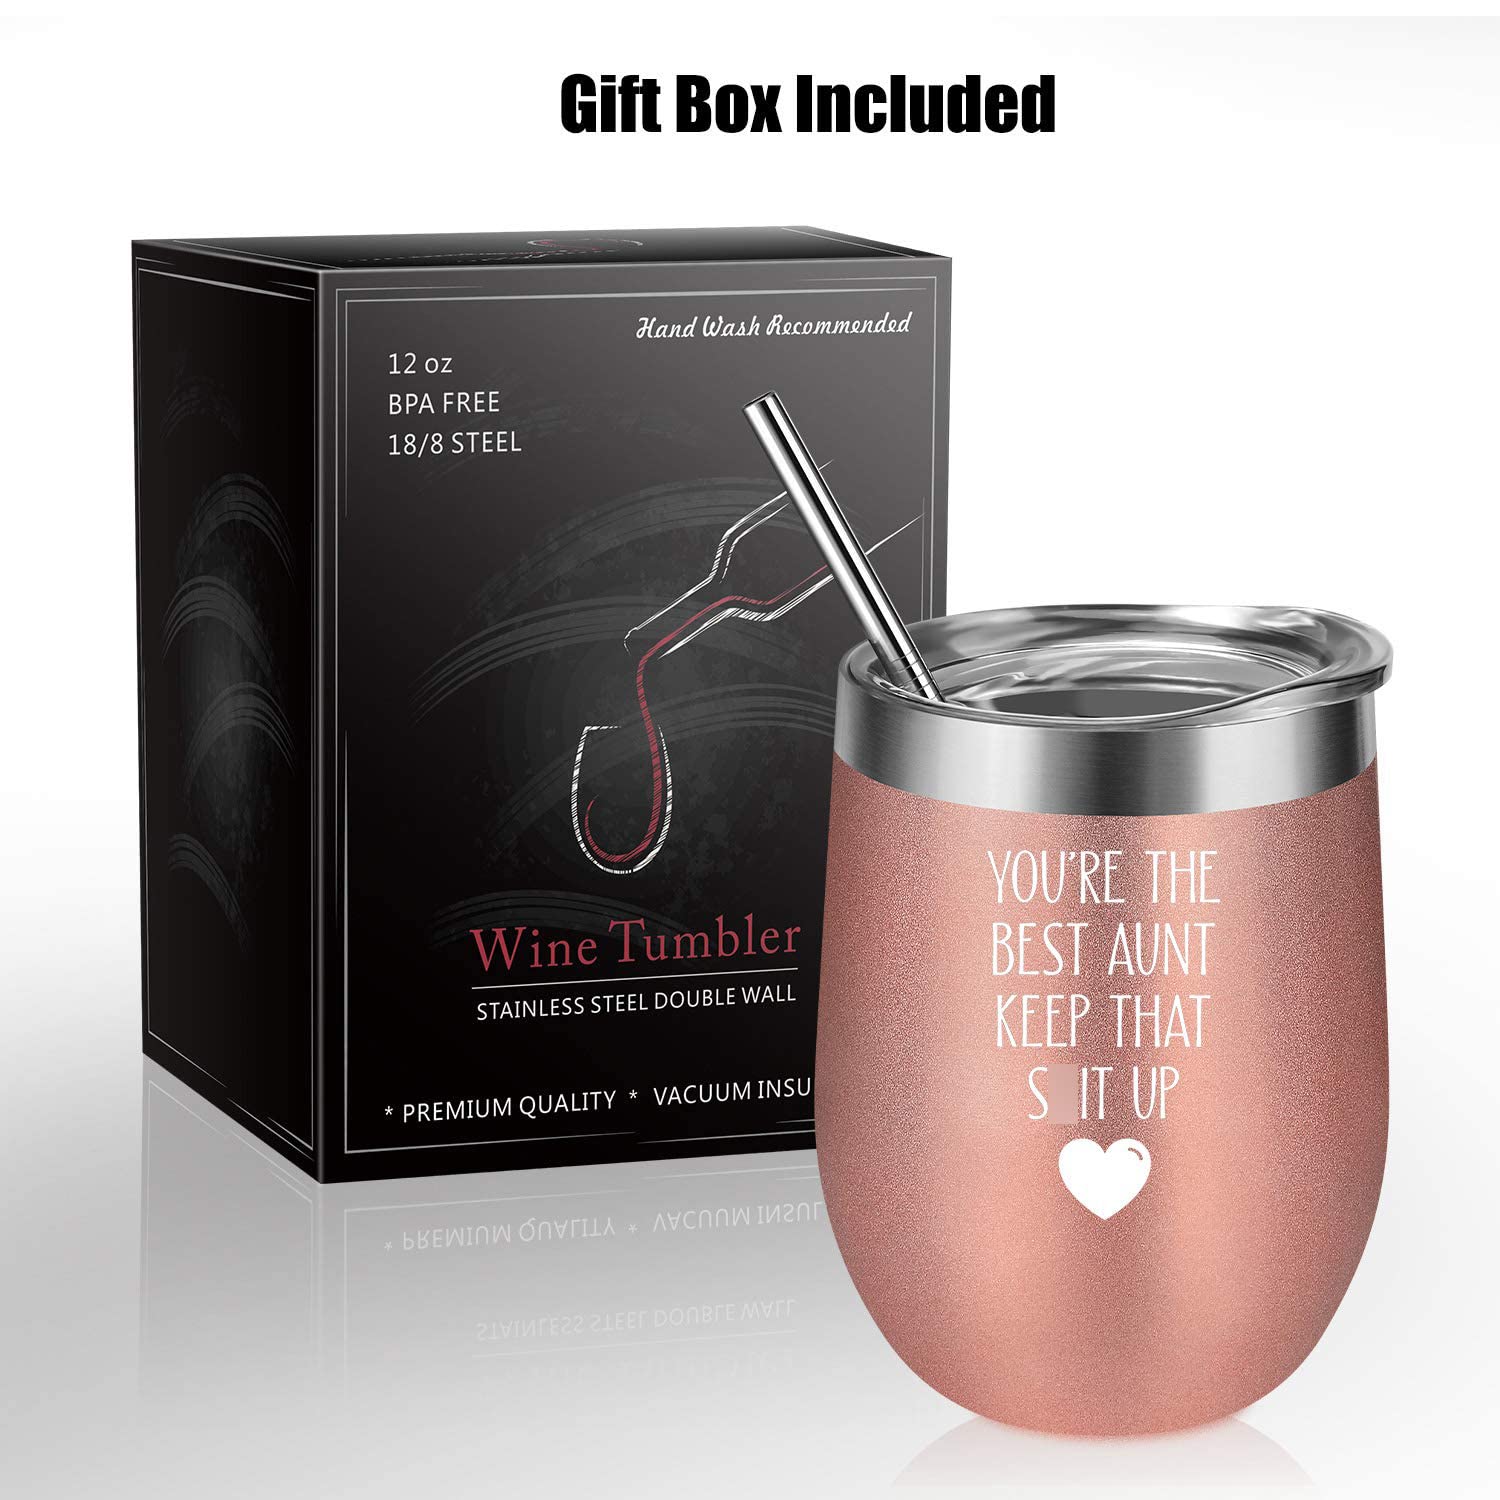 Coolife Wine Tumbler - Aunt Gifts from Niece, Nephew - Funny Gifts for Aunts, Great Aunt, Favorite Aunt Gifts, BAE Best Aunt Ever Gifts, Aunt Birthday Gift - Gifts for Aunt from Niece - Aunt Mug Cup